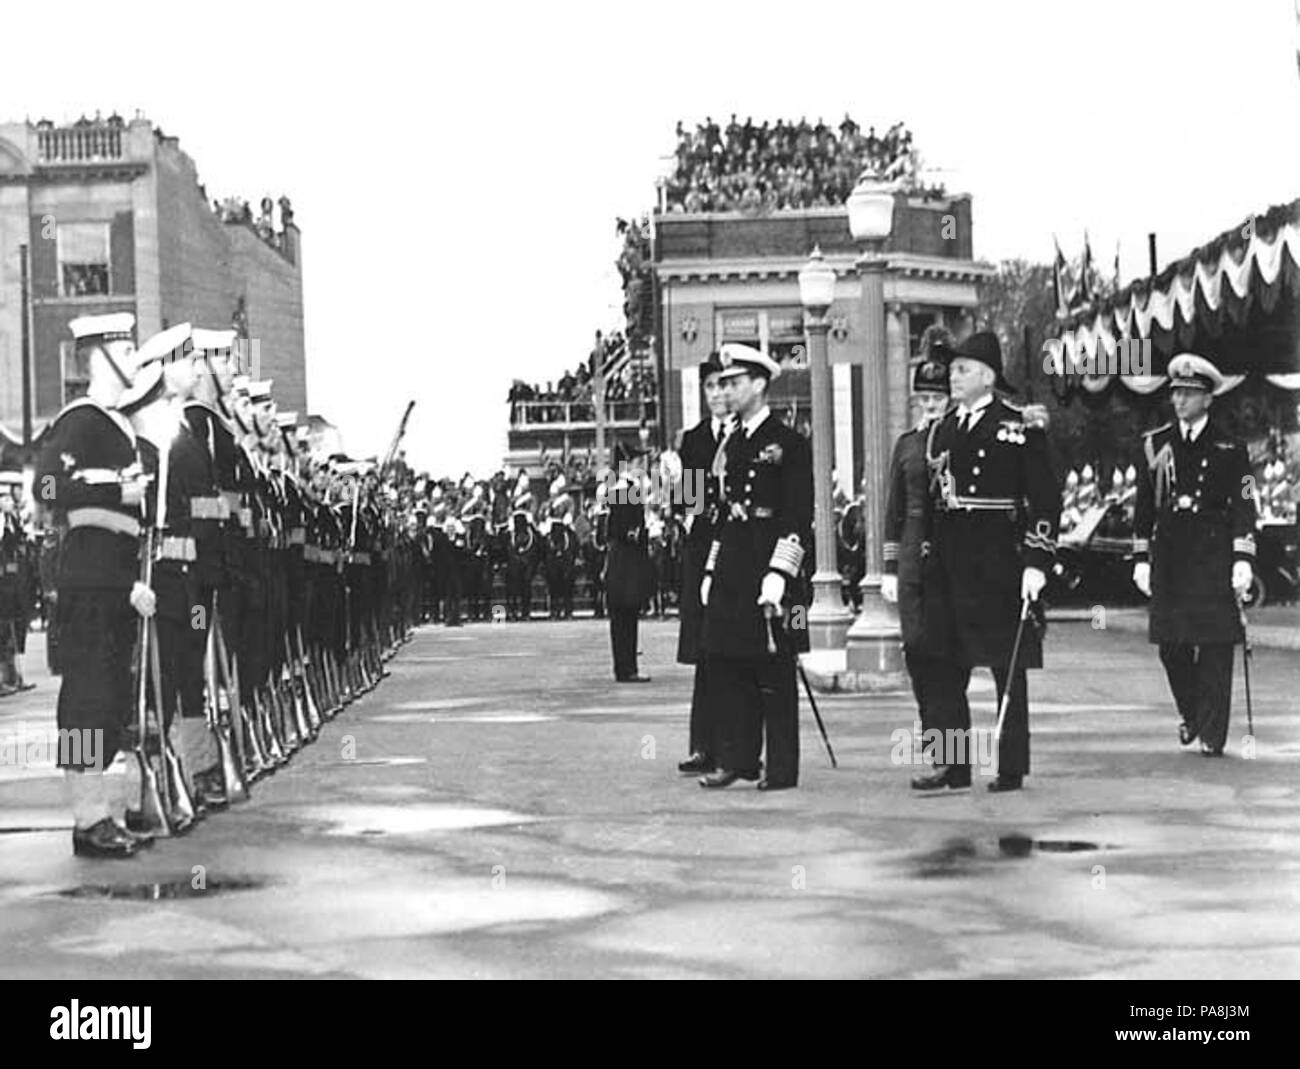 113 His Majesty King George VI inspects a Guard of Honour during the 1939 Royal Tour of Canada Stock Photo